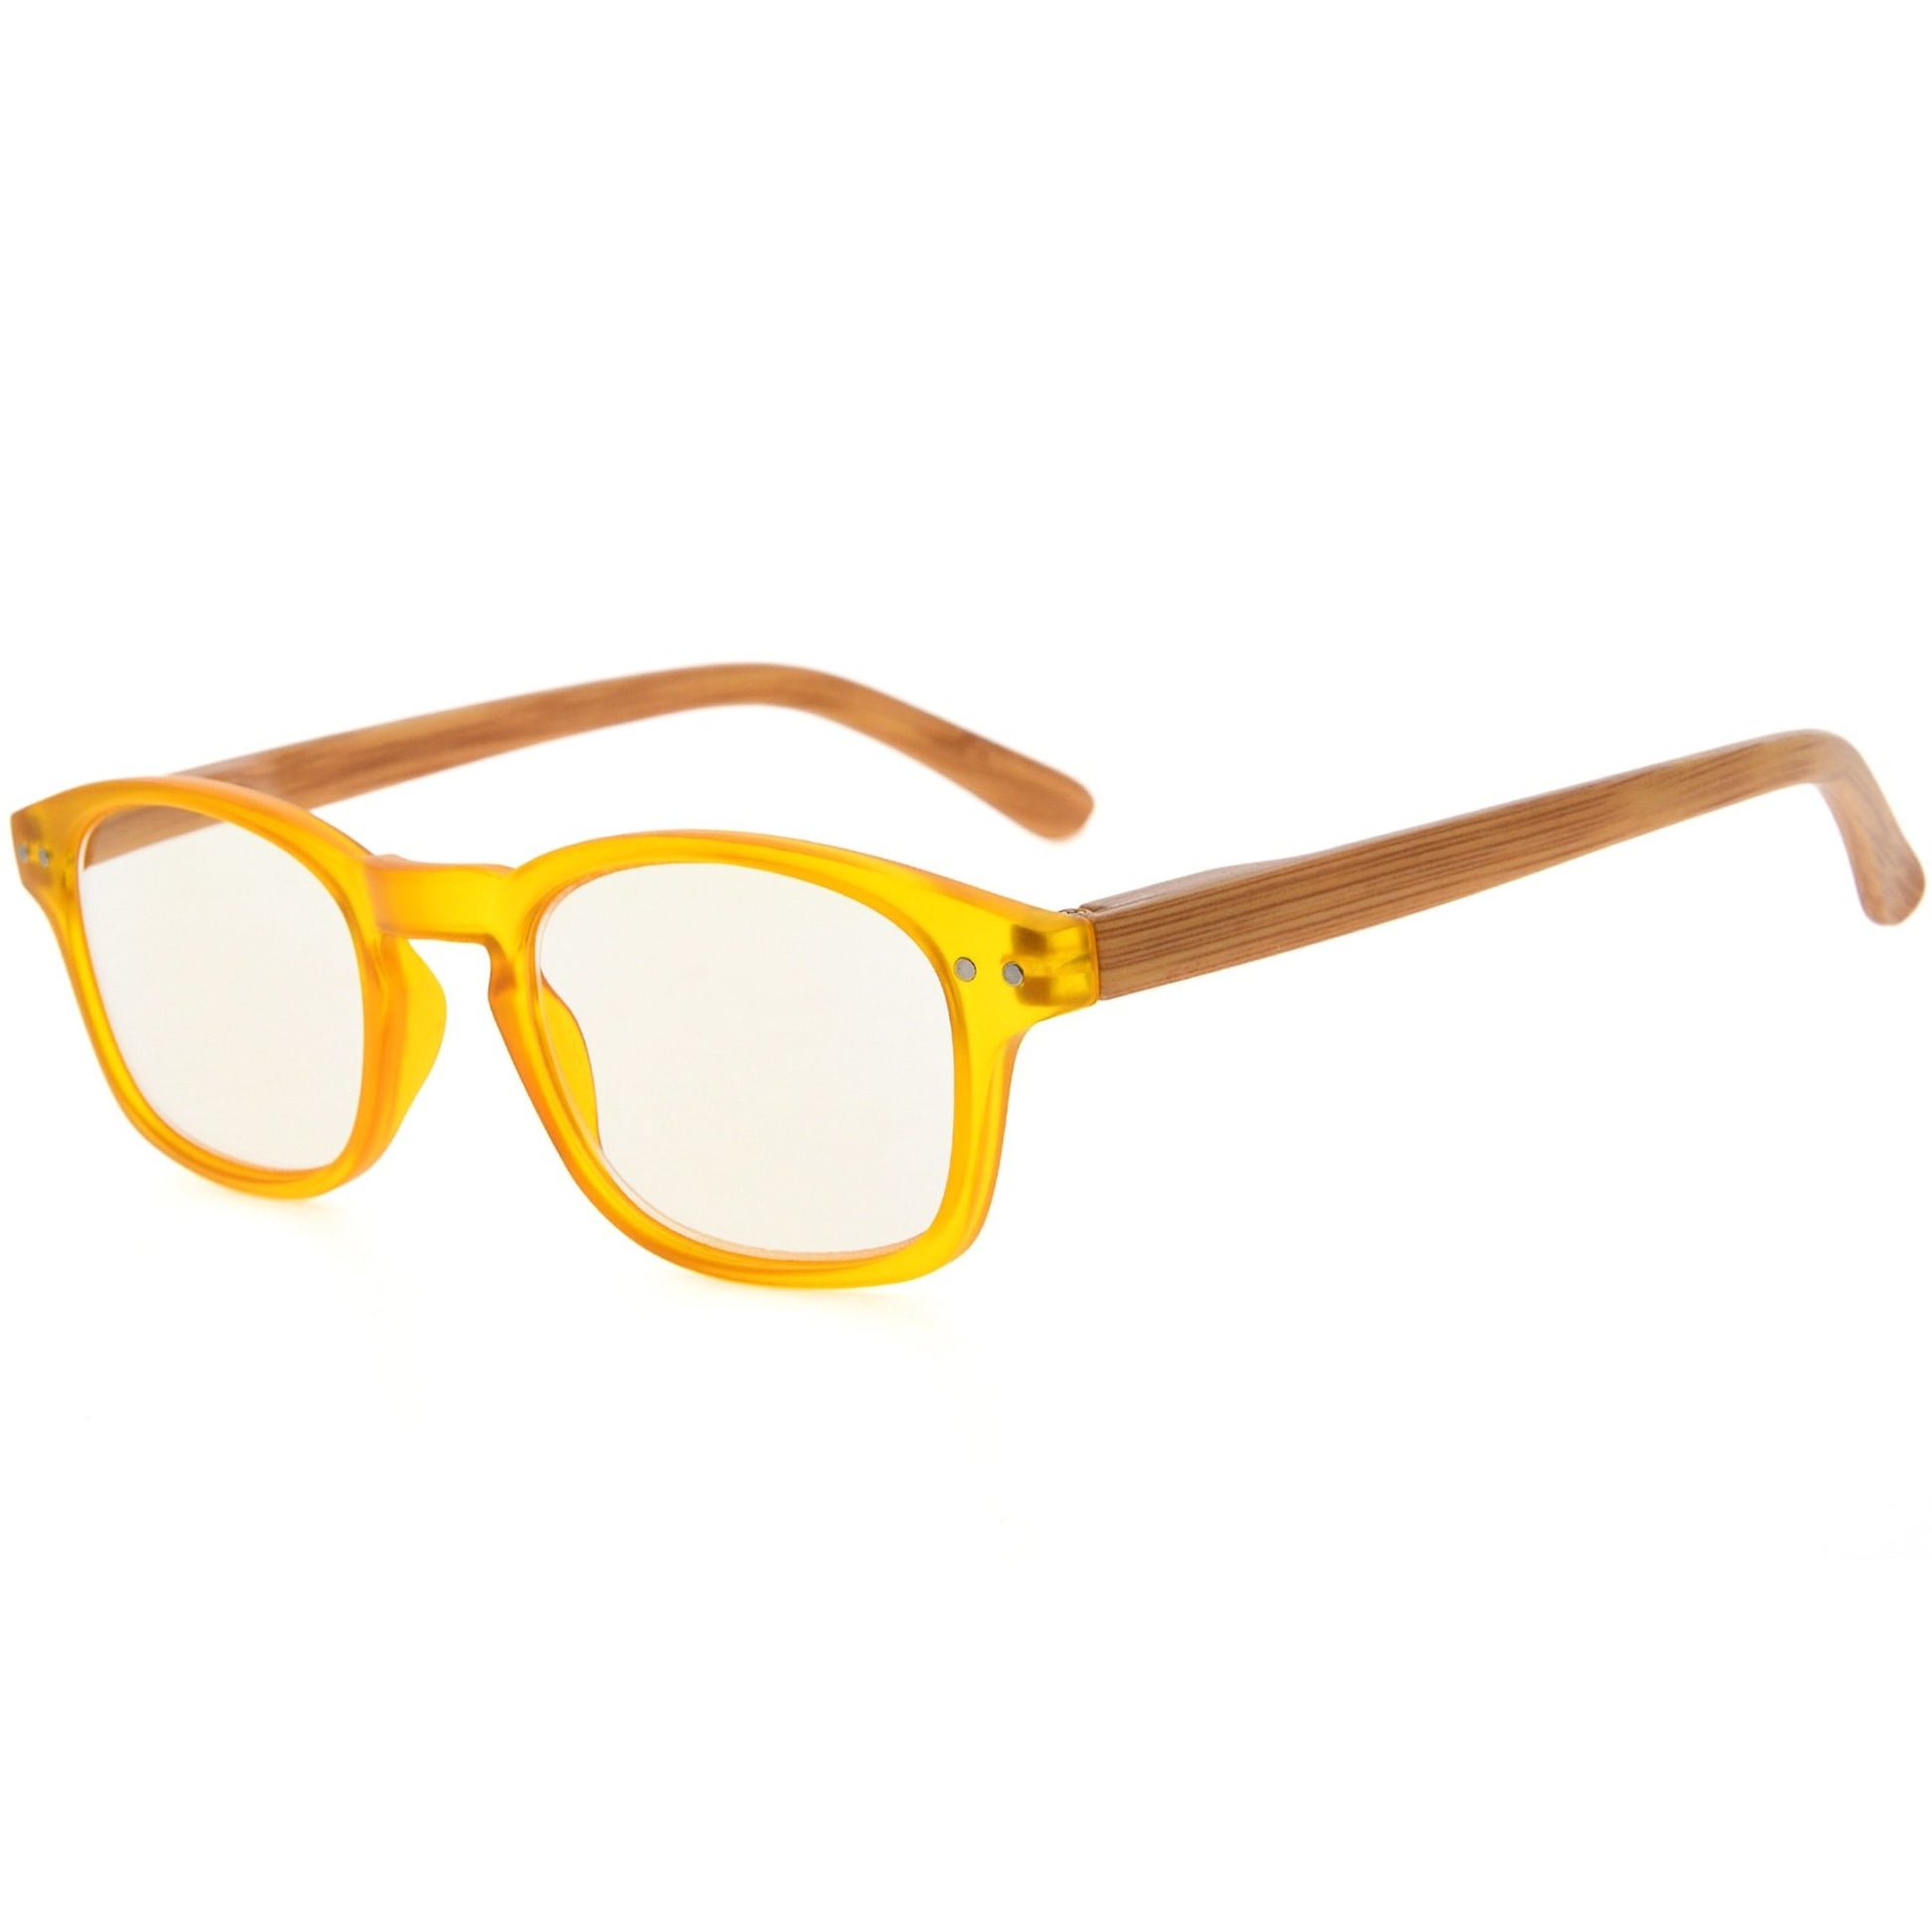 Bamboo-look Temples Computer Reading Glasses Yellow CG034